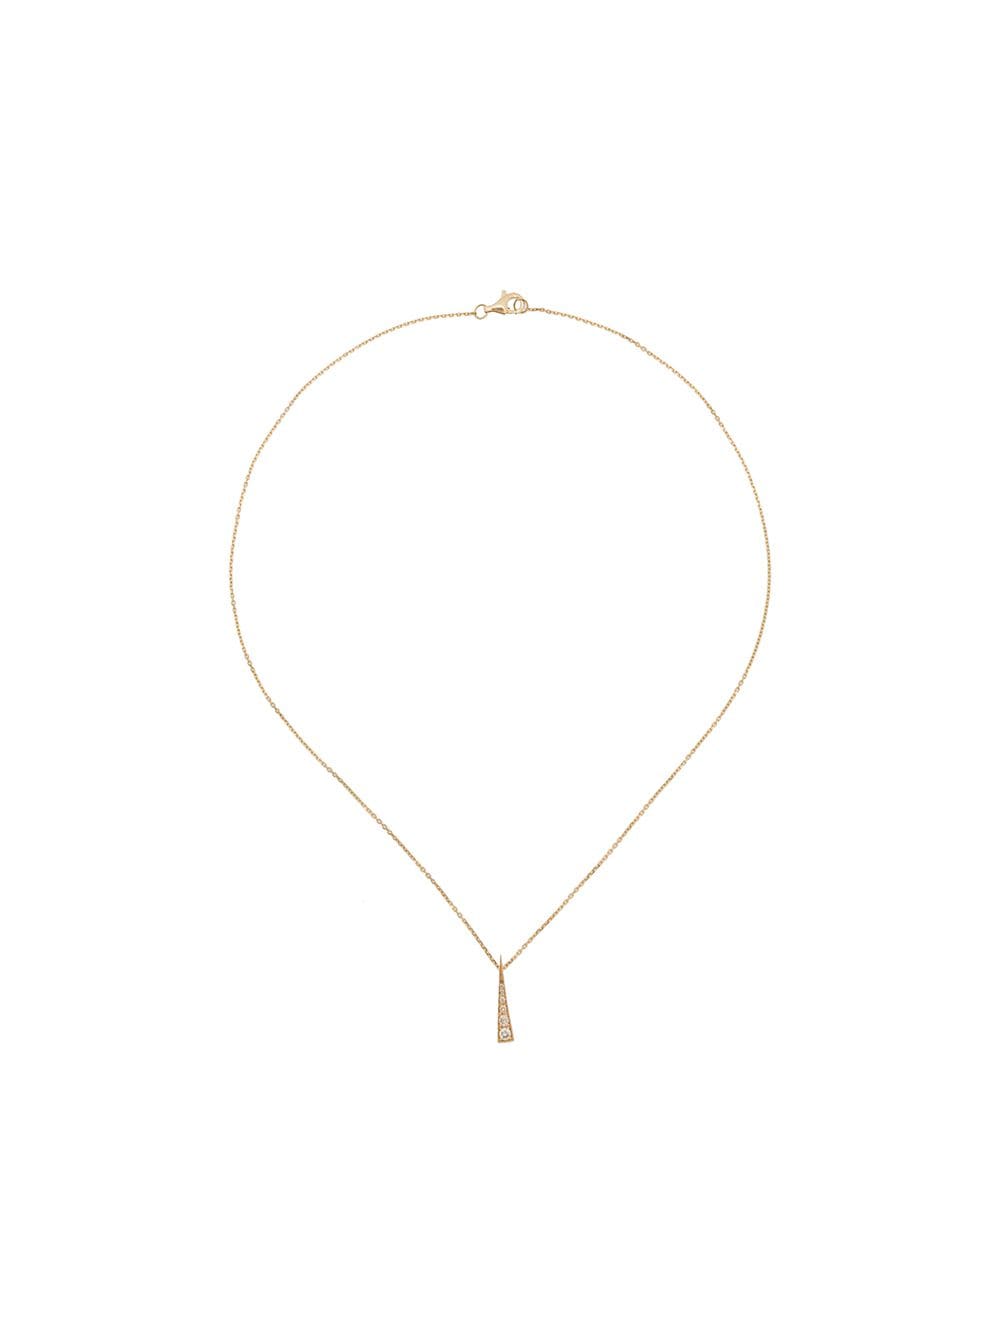 18kt yellow gold Spark diamond convertible necklace